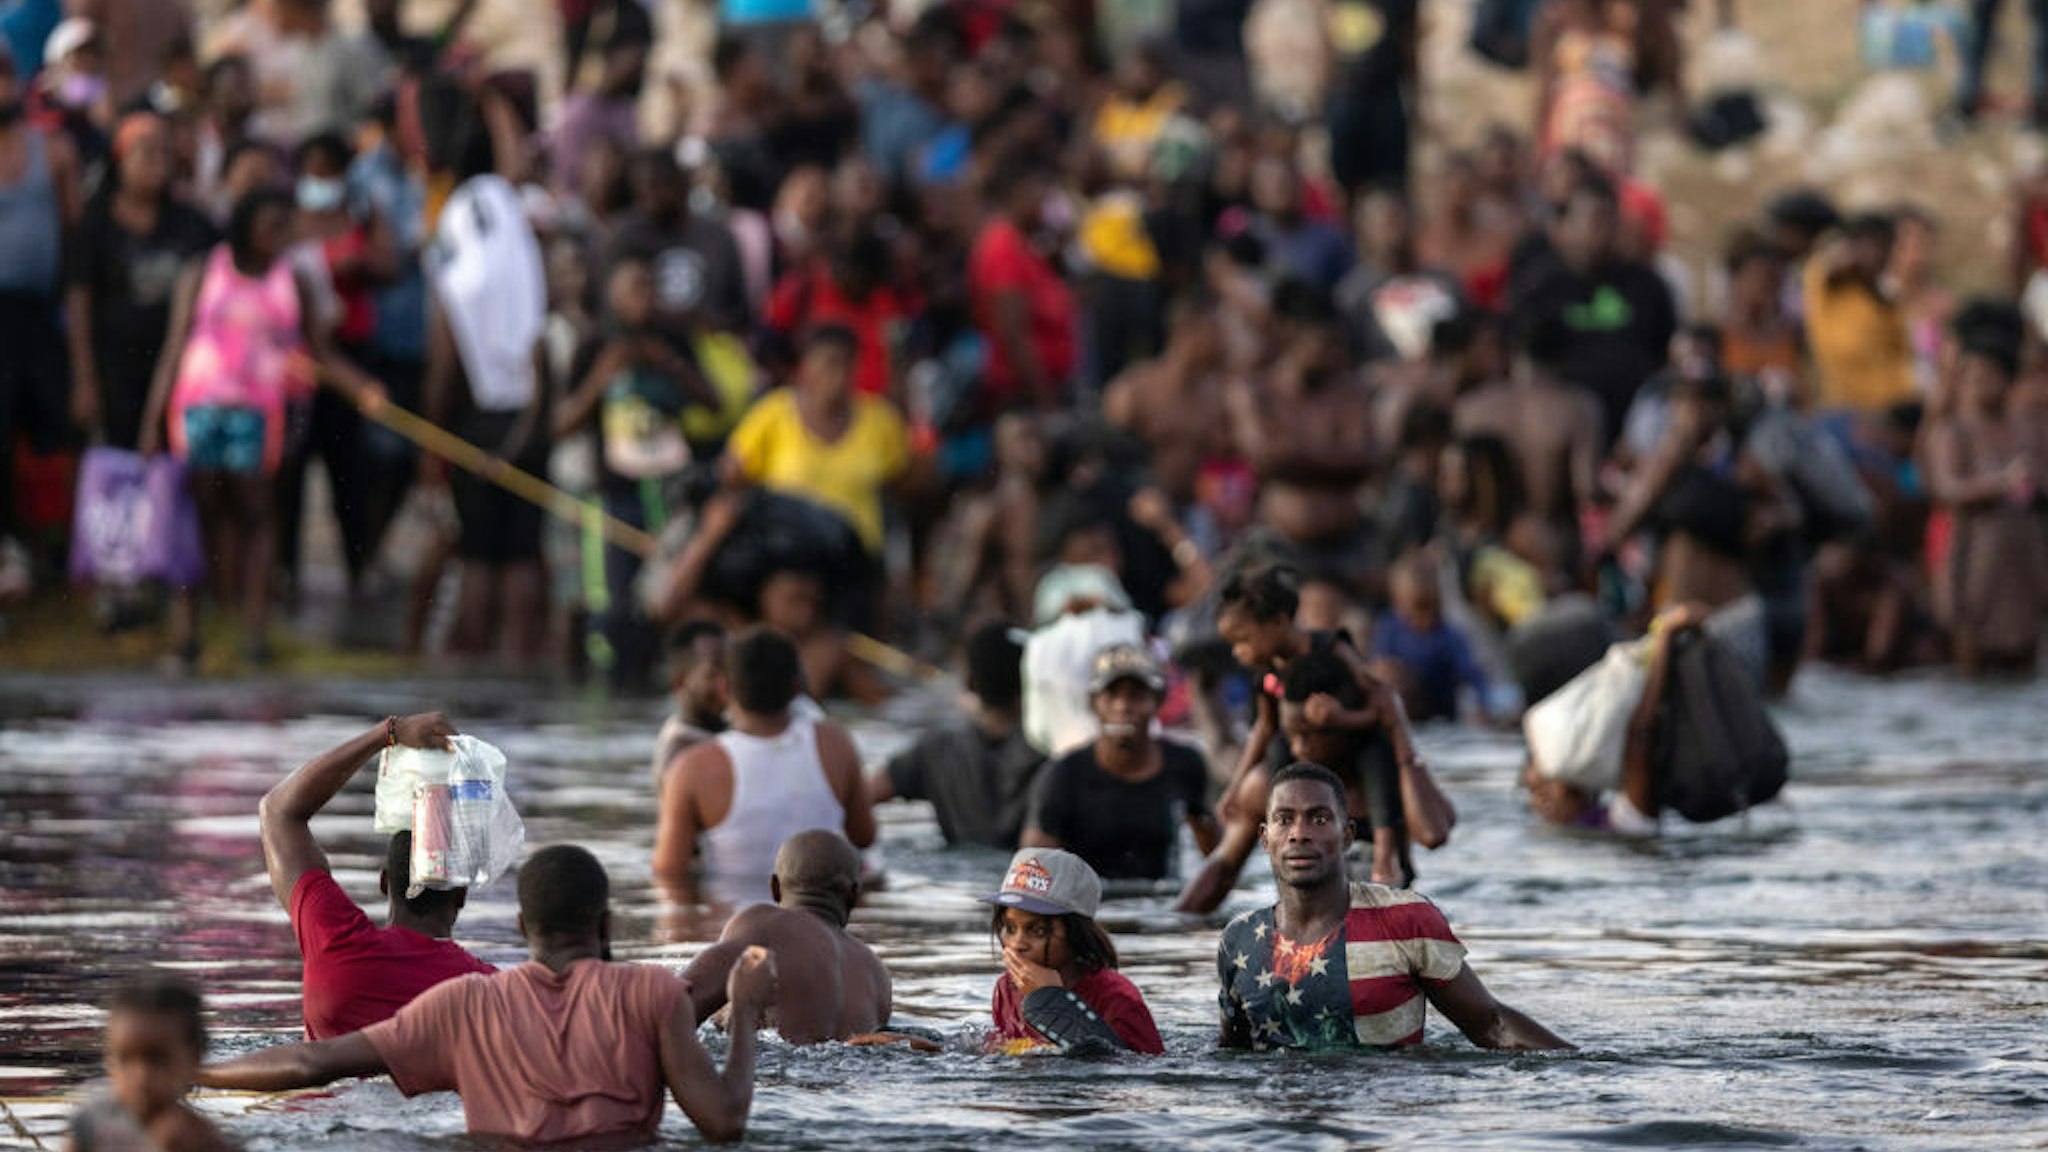 mmigrants, mostly from Haiti gather on the bank of the Rio Grande on September 19, 2021 in Ciudad Acuna, Mexico, across the border from Del Rio, Texas. A